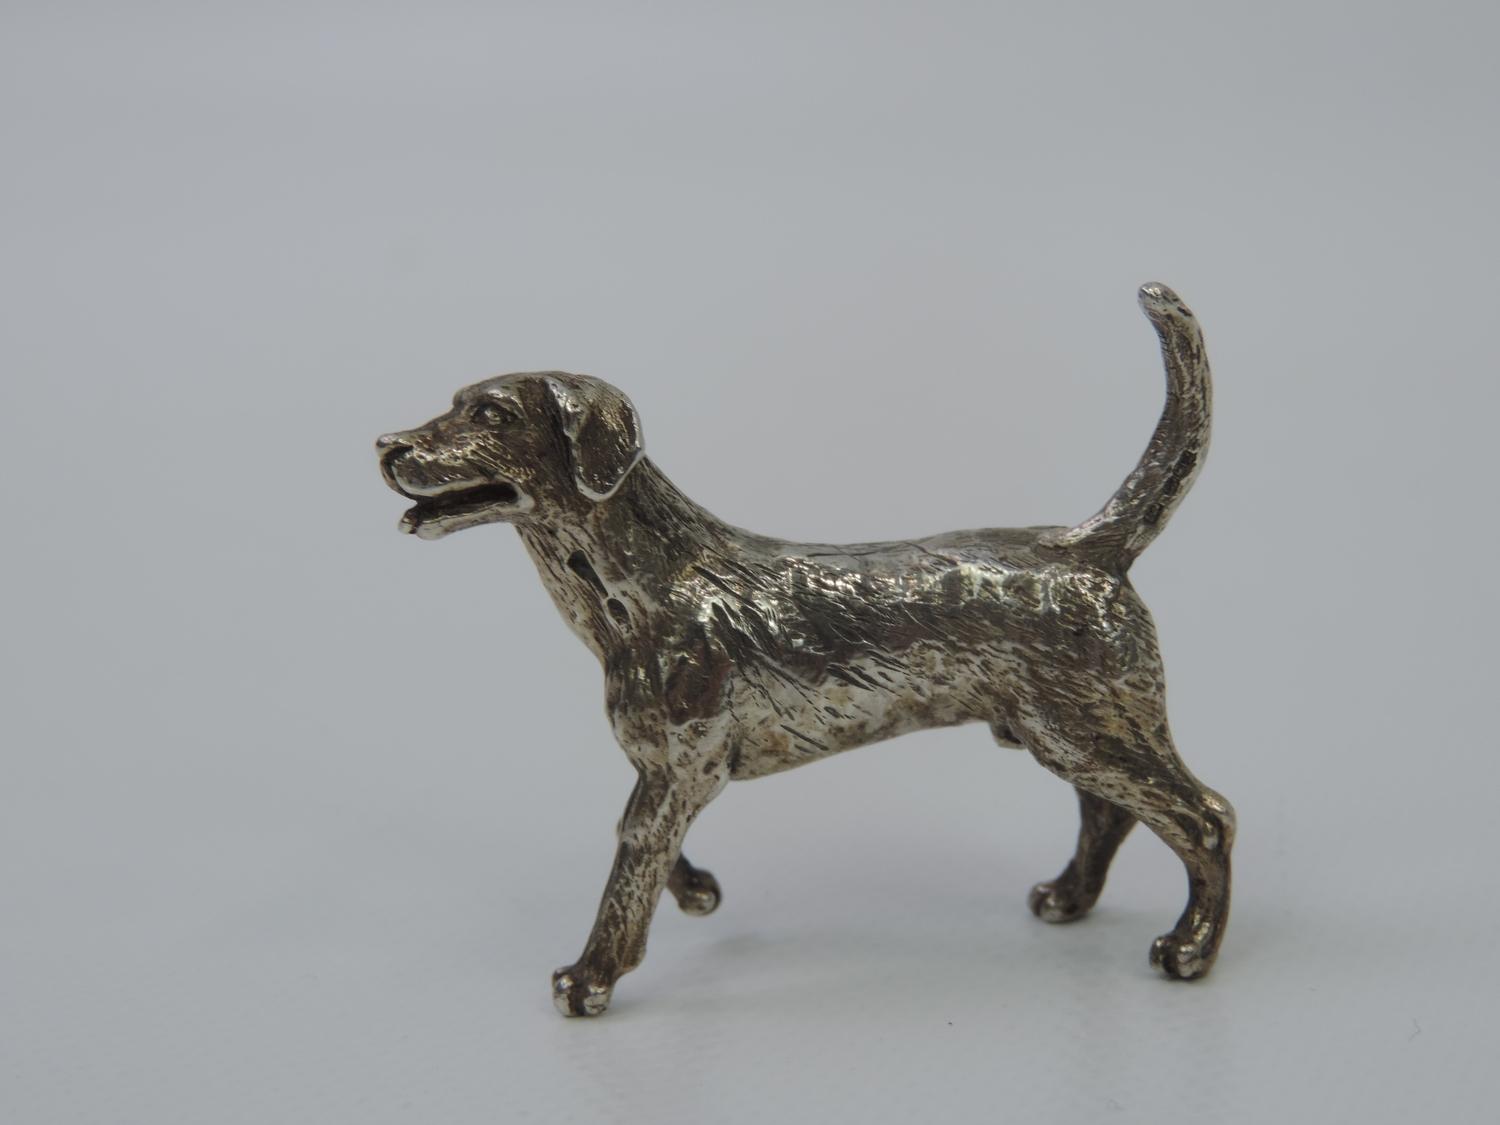 Sterling Silver Miniature - Dog - 23 grams